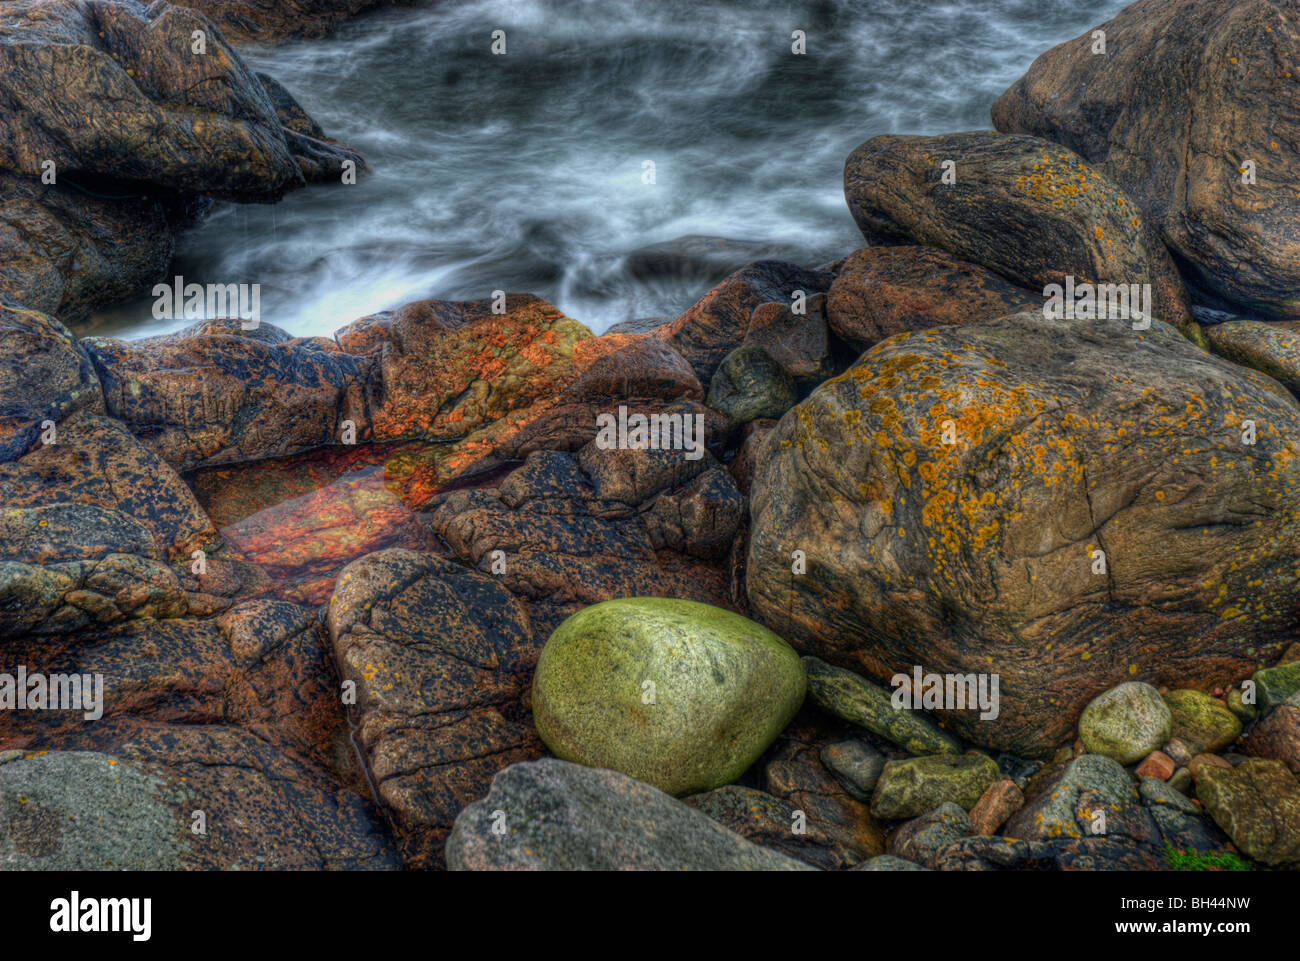 Colourful rocks, pebbles and seawater on shore near harbour of Aberdeen. Stock Photo